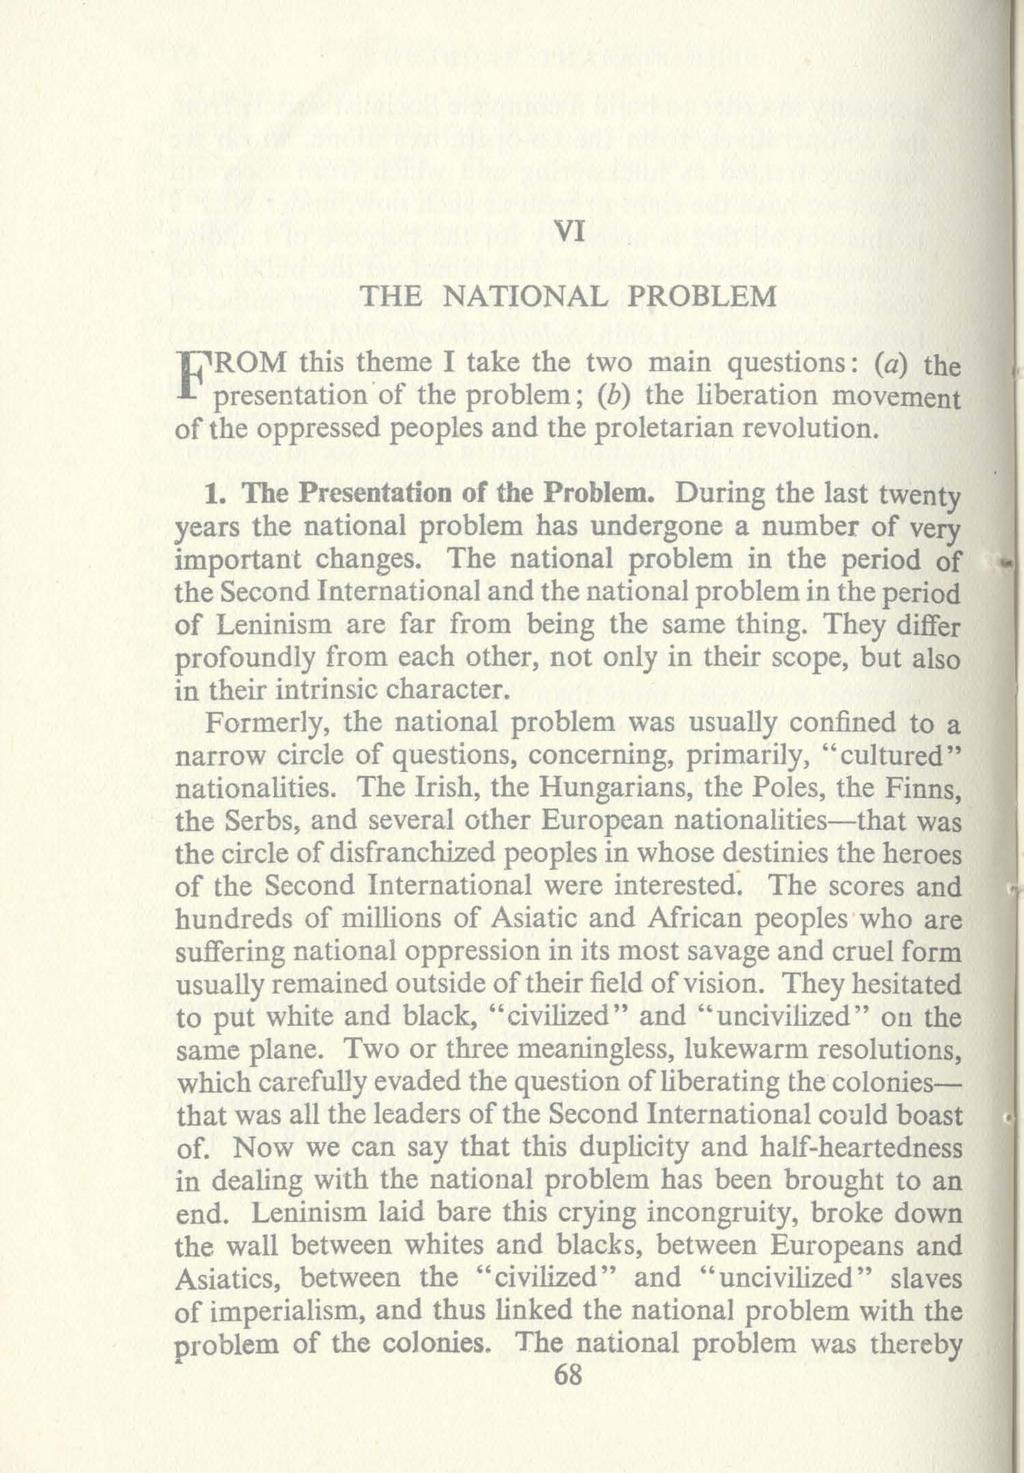 VI THE NATIONAL PROBLEM F:r?s~~t~~~~h~:?;h~~~~l~~/0) ~:i~b~~:t~~~n~o~~ ~ ~~~ of the oppressed peoples and the proletarian revolution. 1. The Presentation of the Problem.